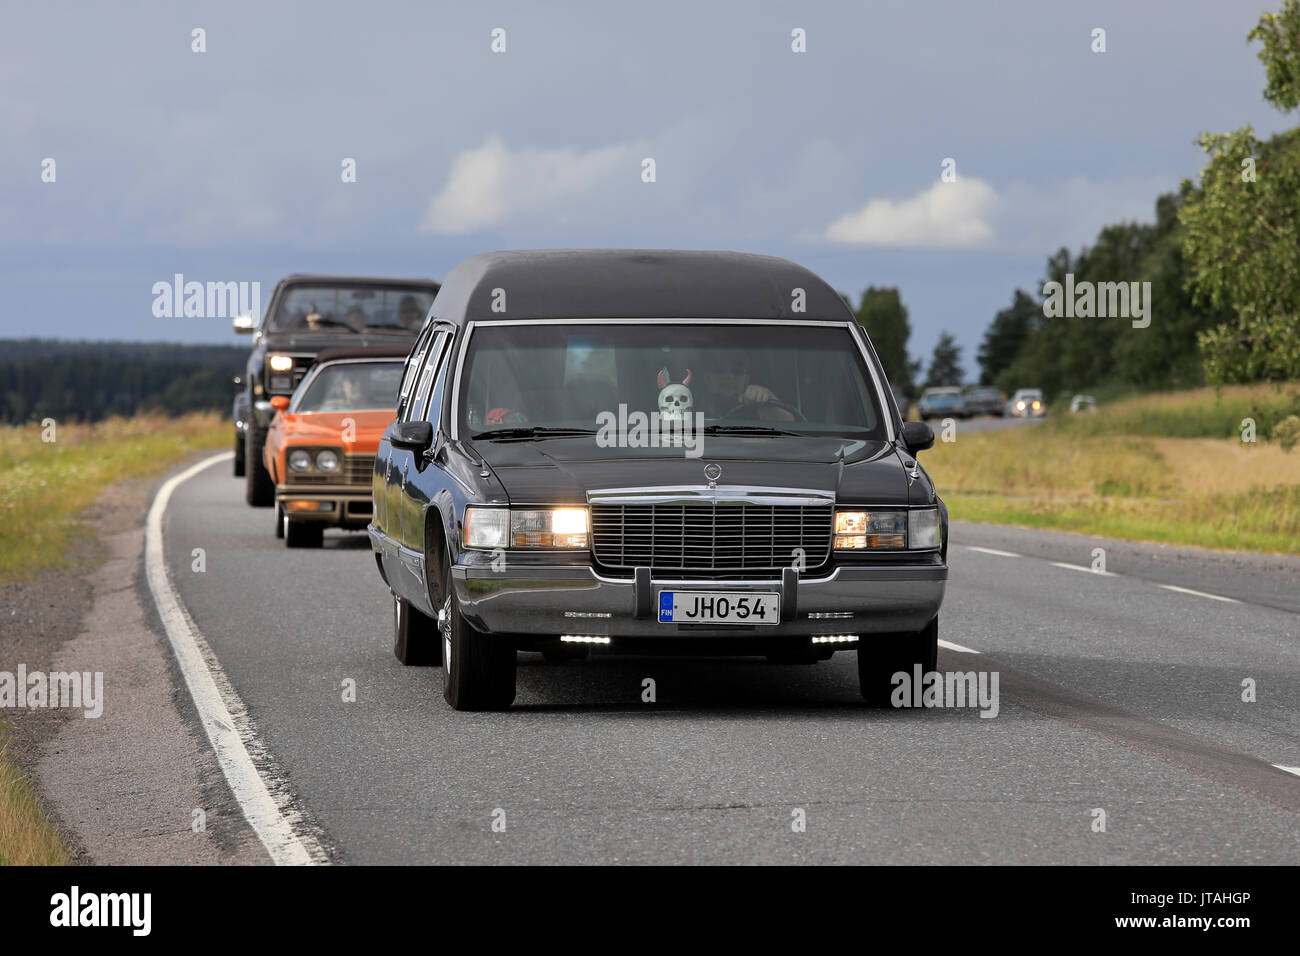 SOMERO, FINLAND - AUGUST 5, 2017: Tuned Cadillac Fleetwood funeral car with led lights and skull detail moves along scenic highway on Maisemaruise 201 Stock Photo